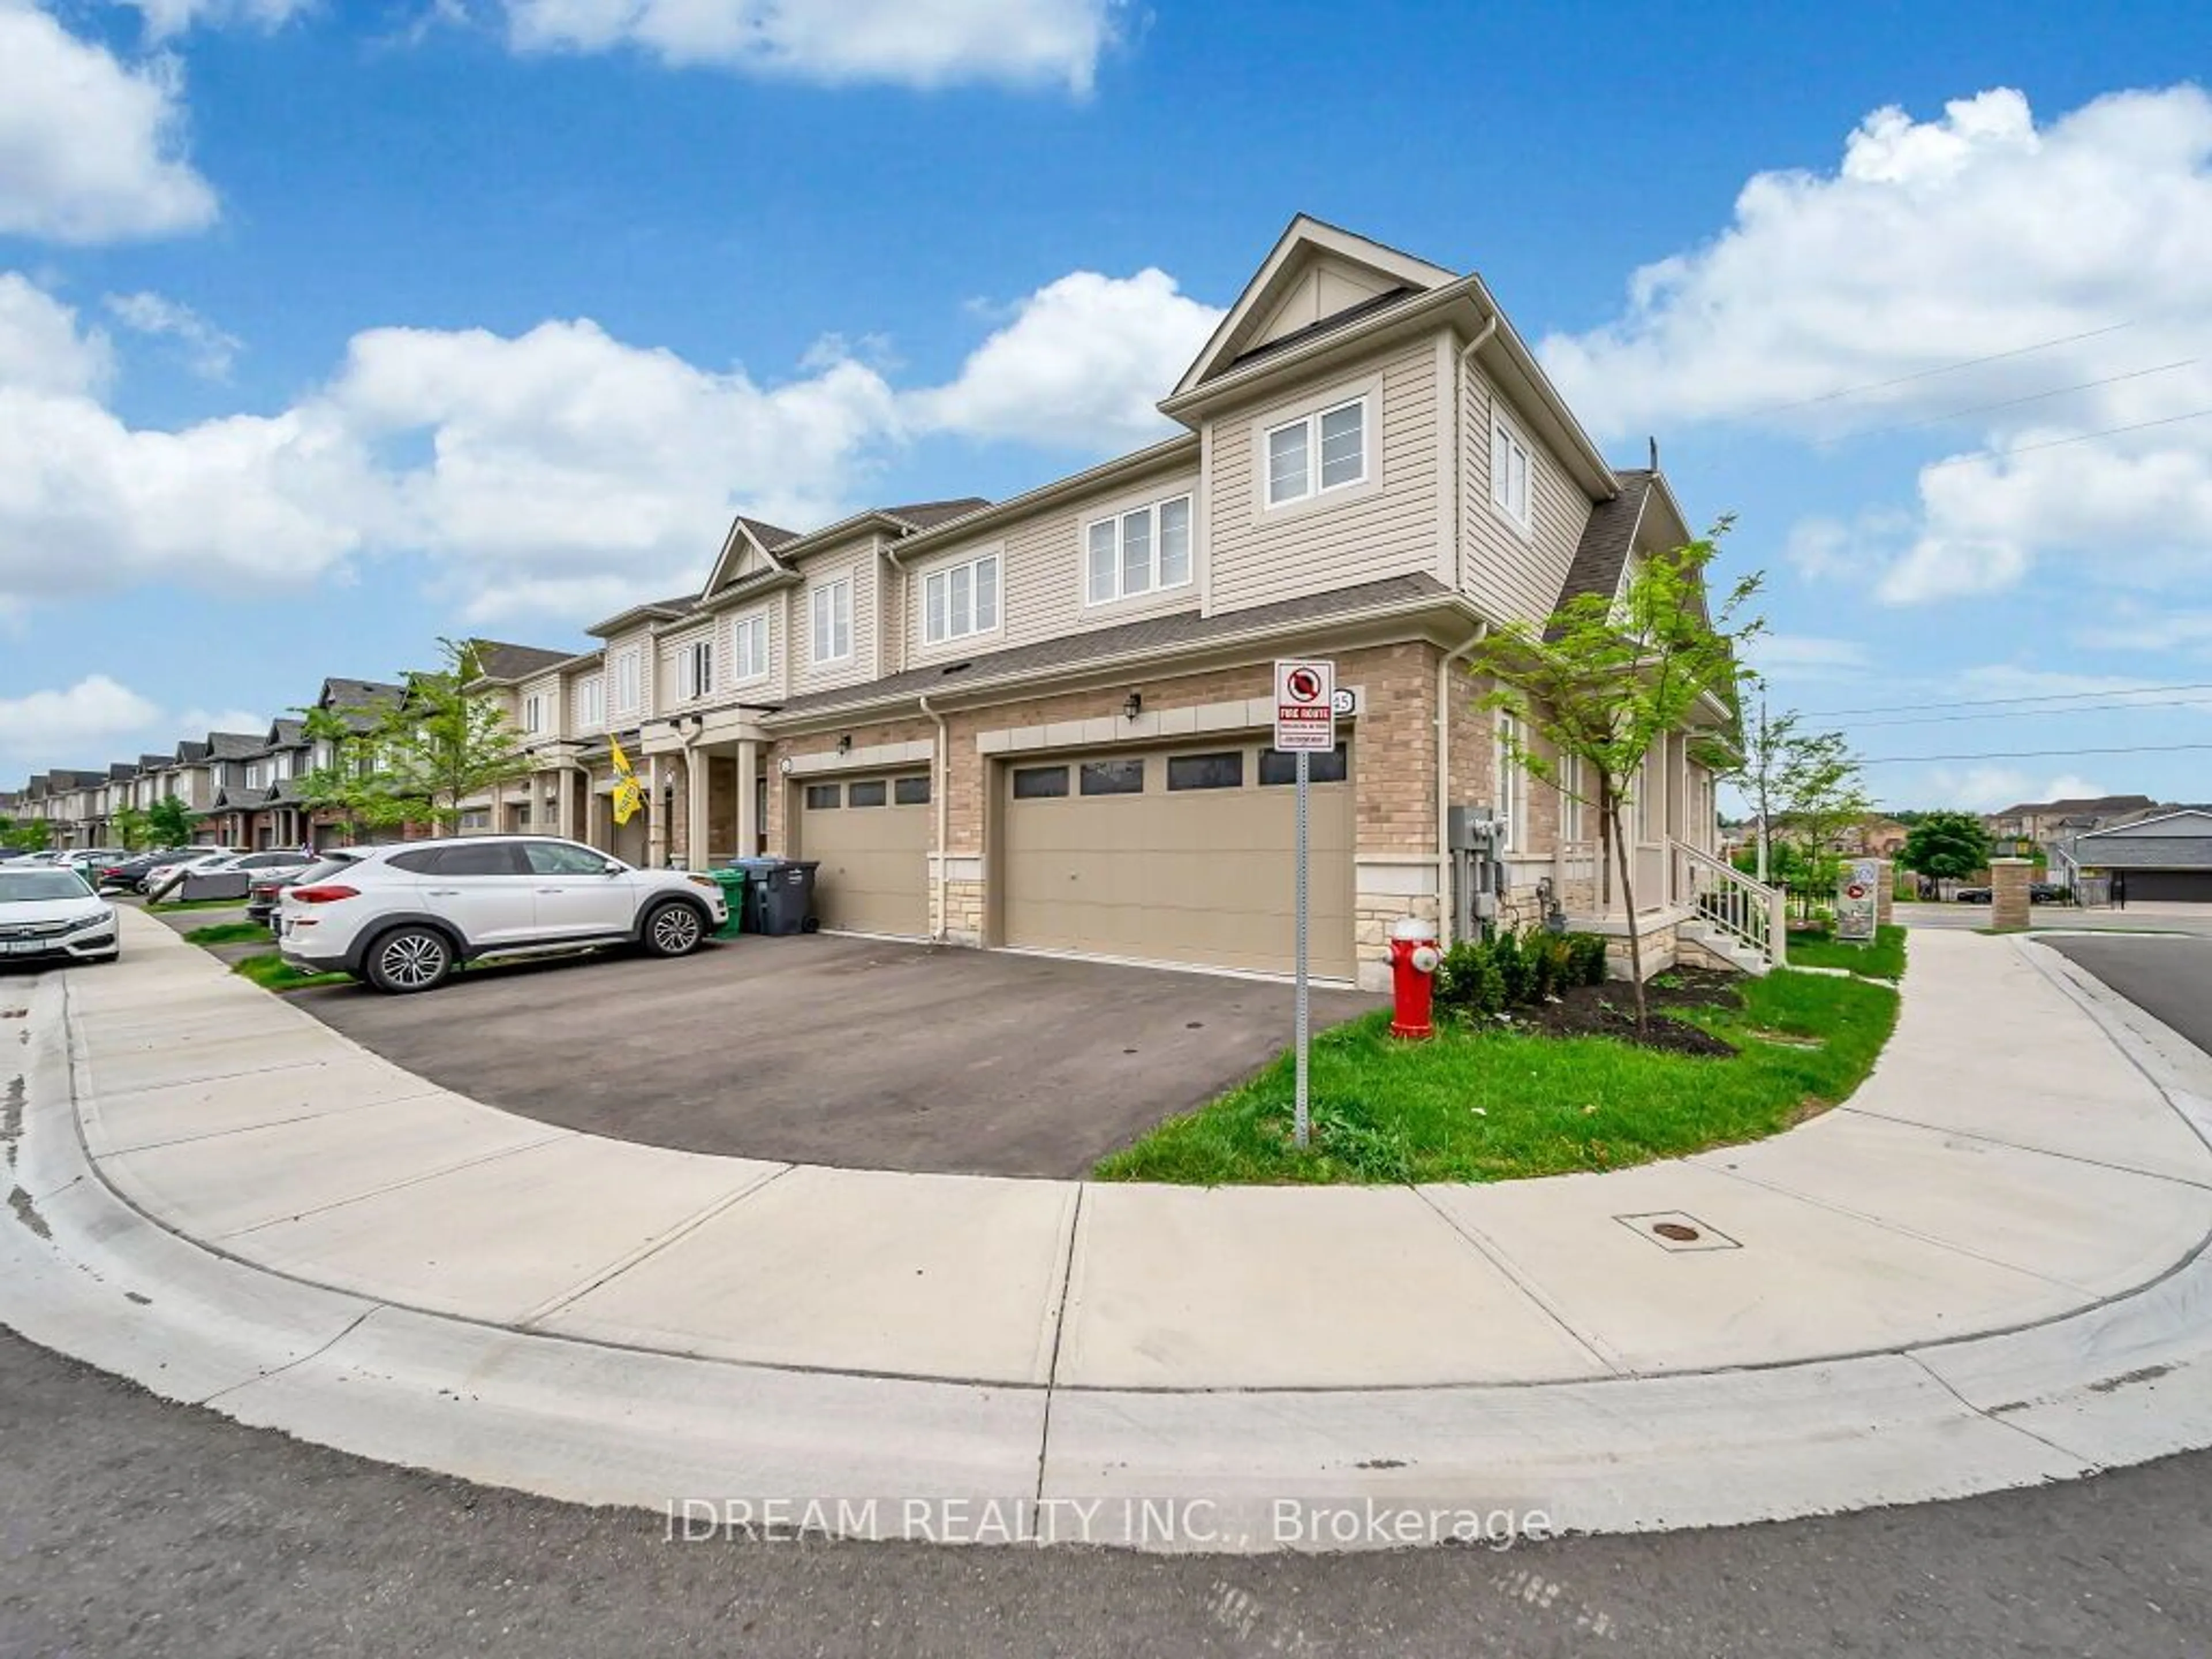 A pic from exterior of the house or condo for 45 Brixham Lane, Brampton Ontario L7A 5K2